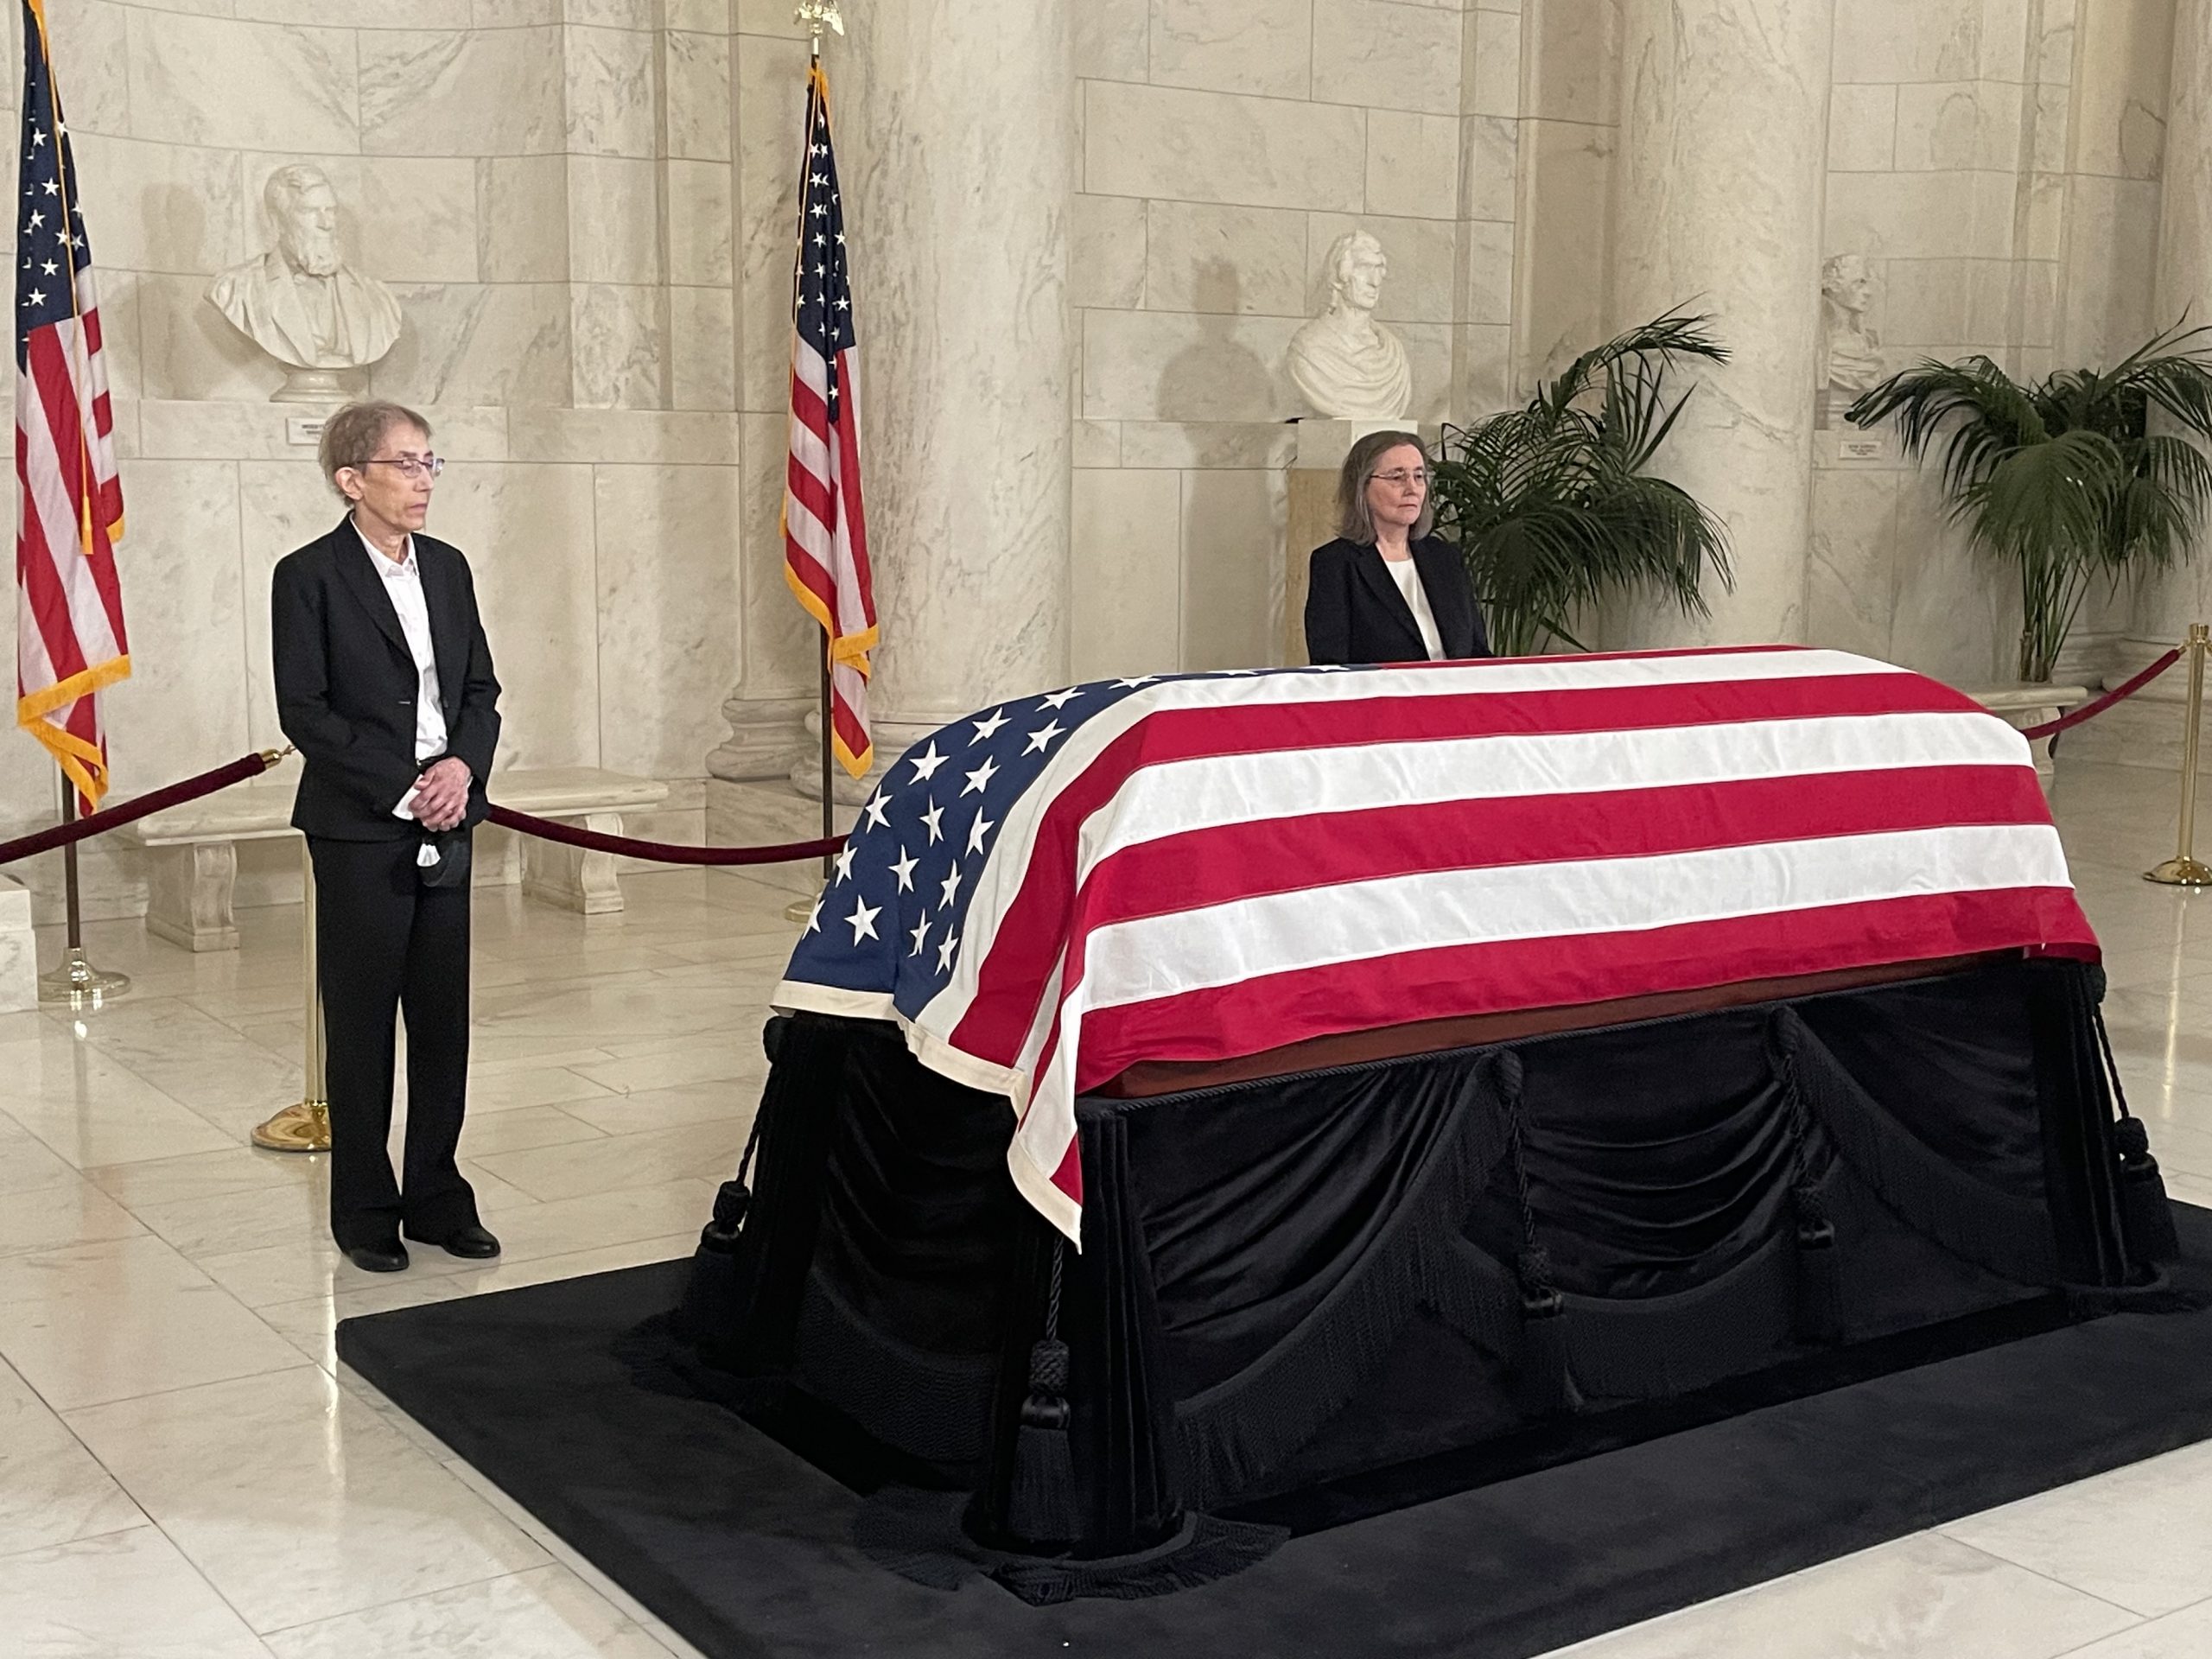 The flag-draped casket of Justice Sandra Day O'Connor